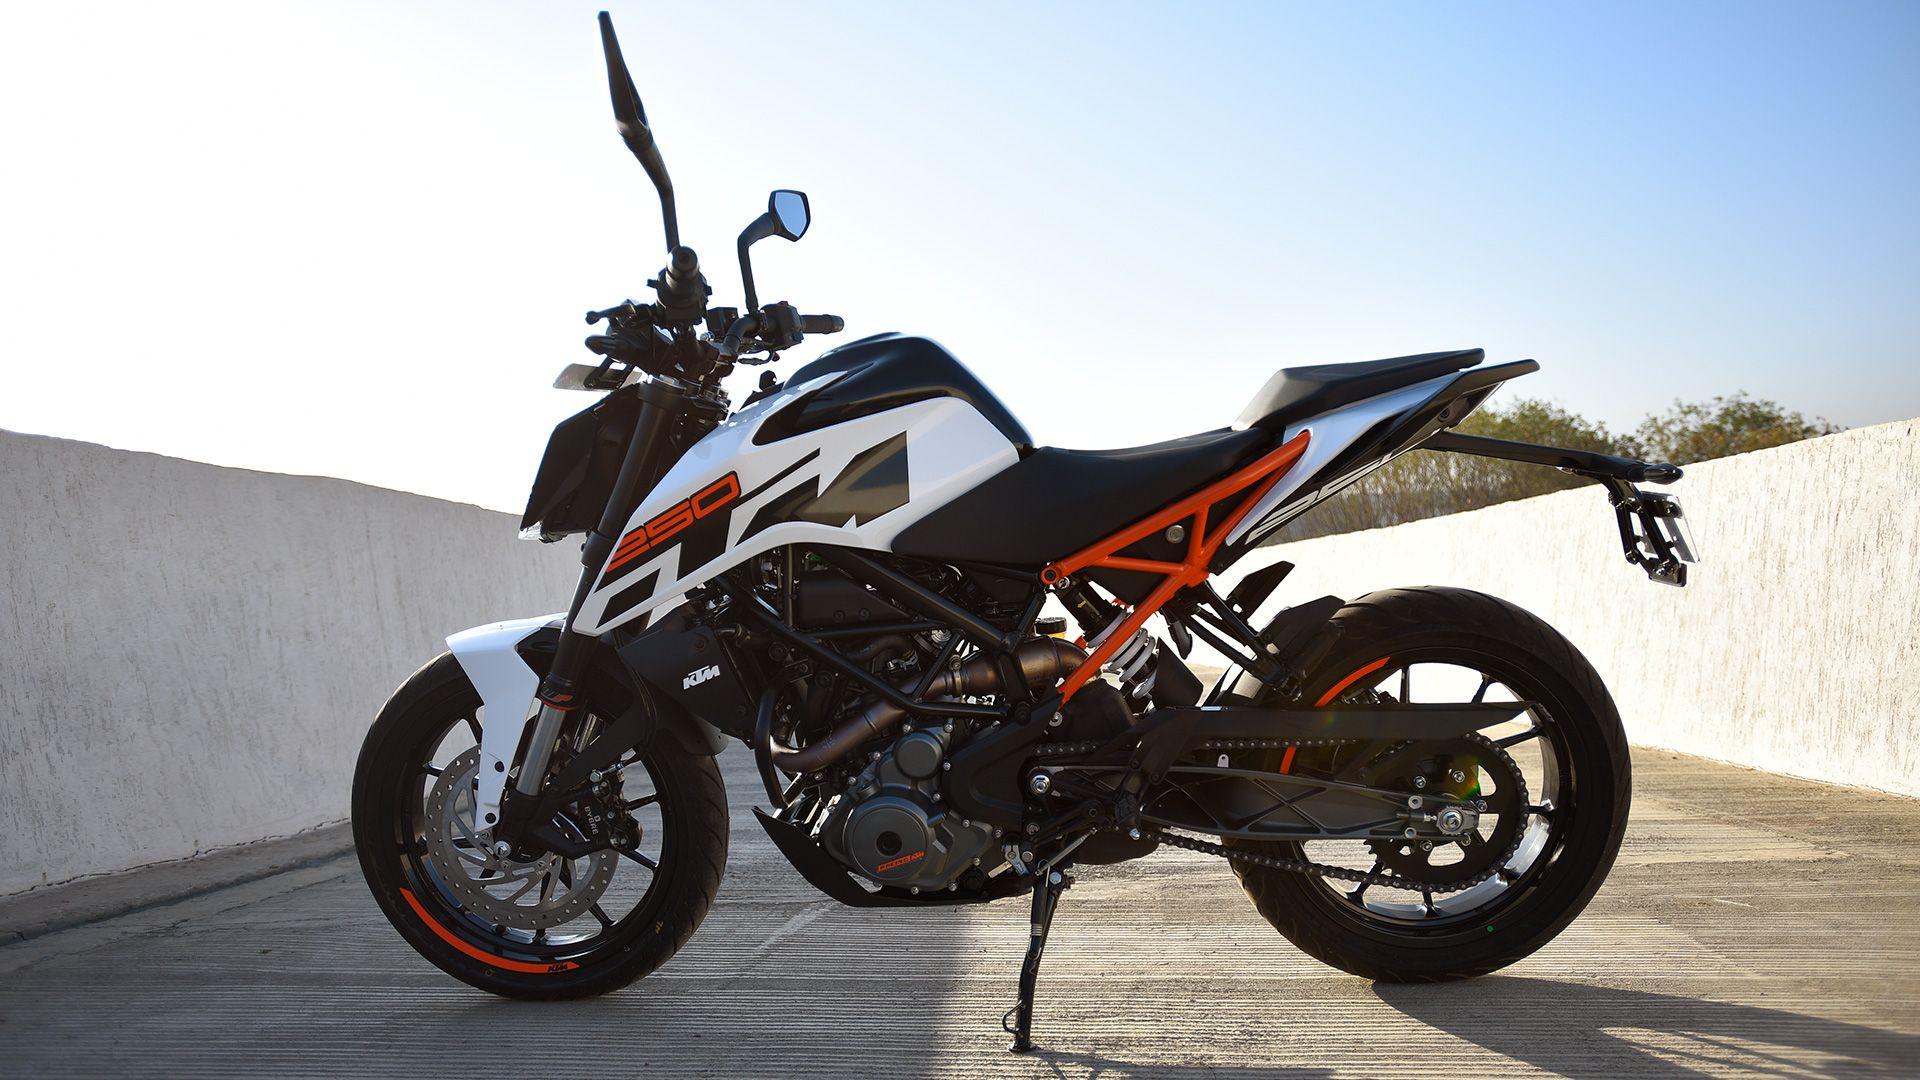 KTM 250 Duke Review, Price In India & Customer Experiences